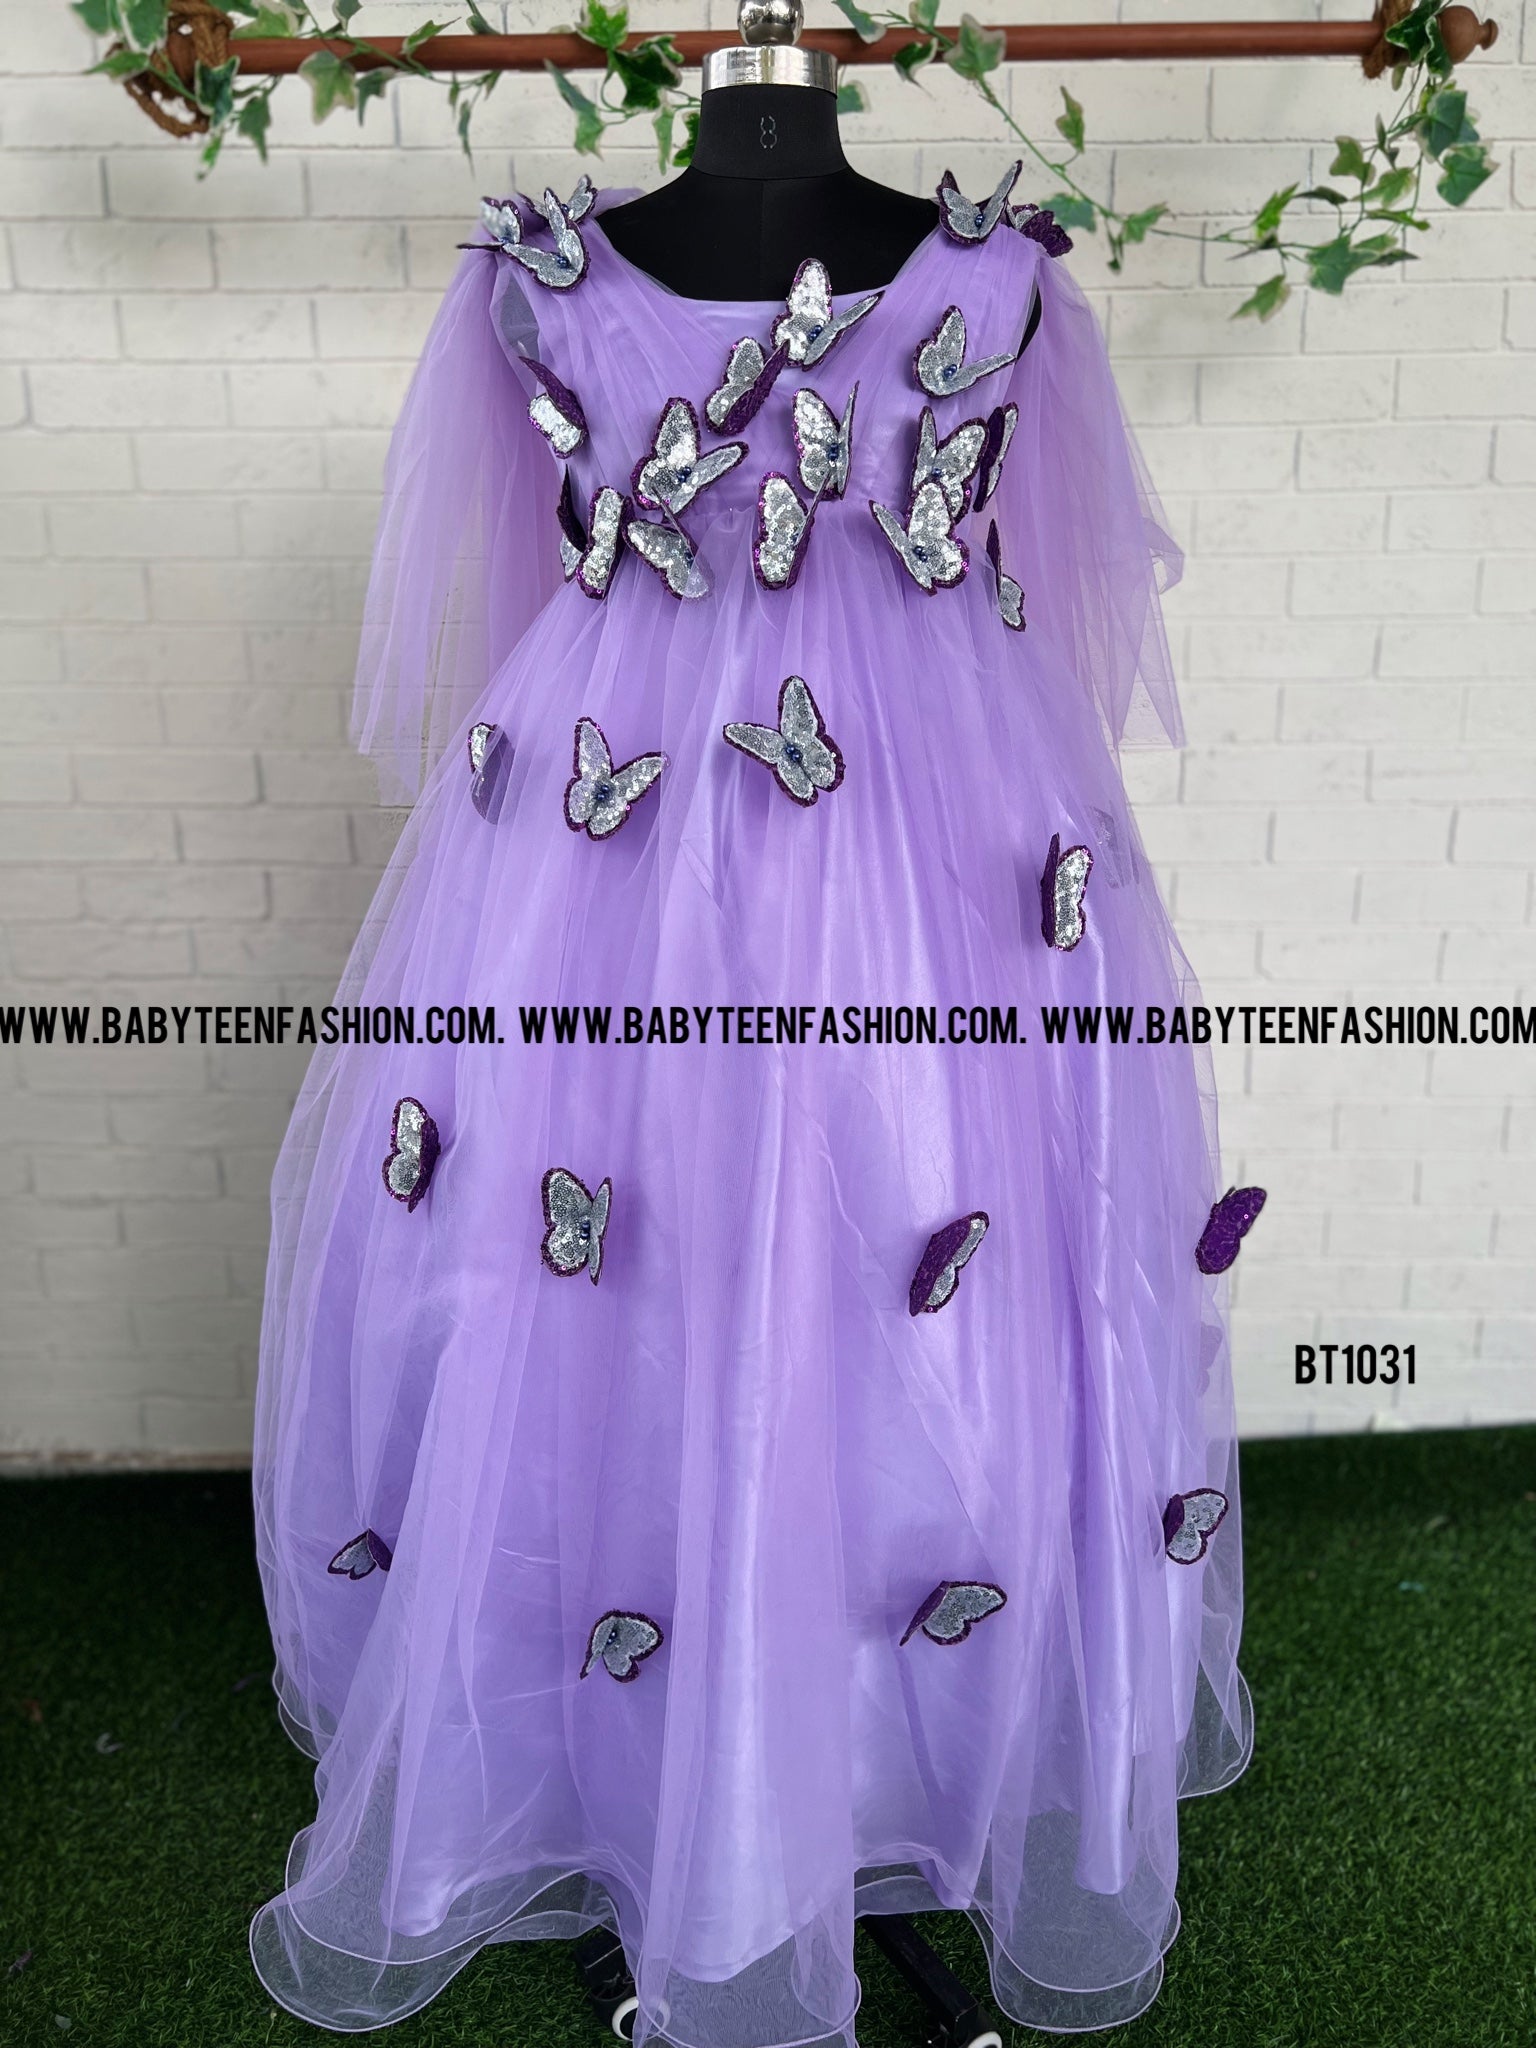 Fantasy Fairy Ball Gown, Corset Tulle Prom Dress, Occasion Dress, Purple  Mother of the Bride Dress, Formal Bustier Dress - Etsy